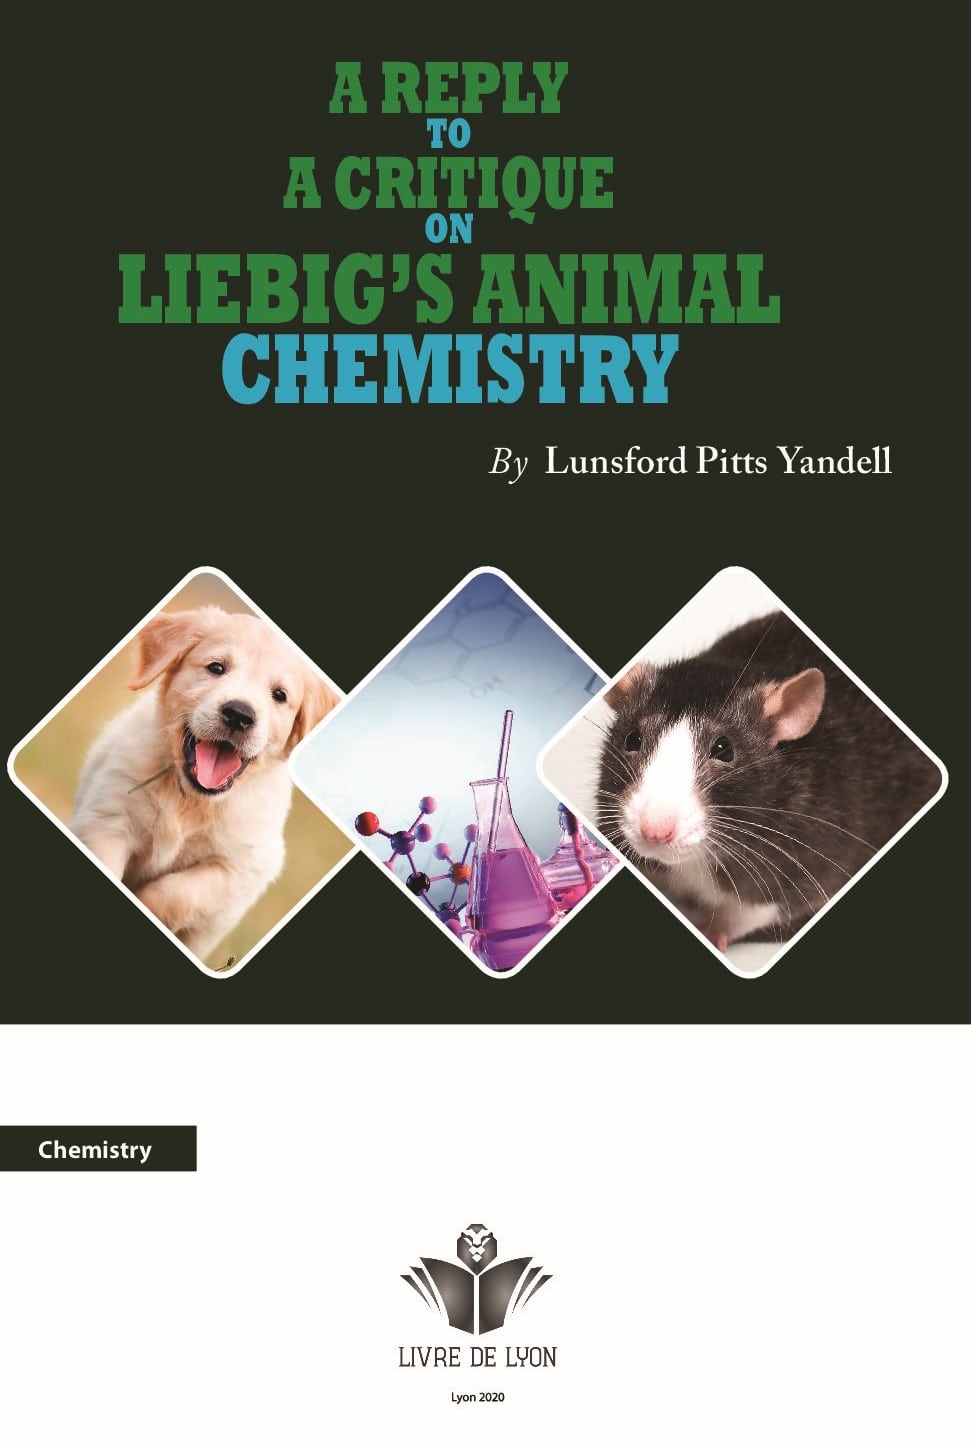 A Reply to a Critique on Liebig's Animal Chemistry